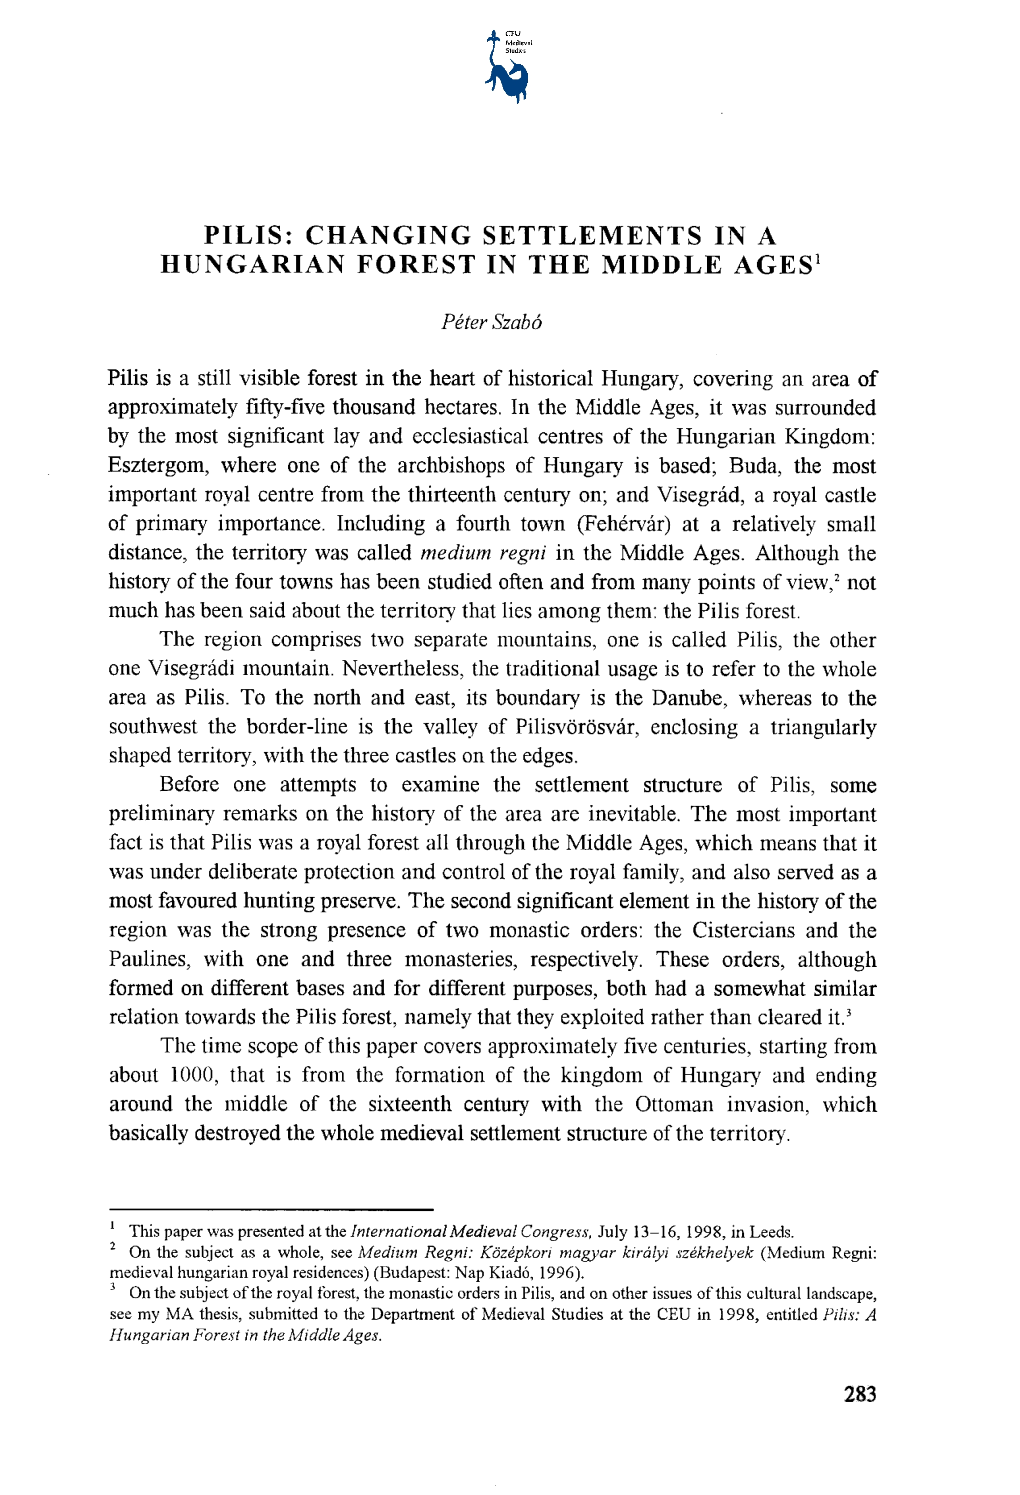 Changing Settlements in a Hungarian Forest in the Middle Ages1